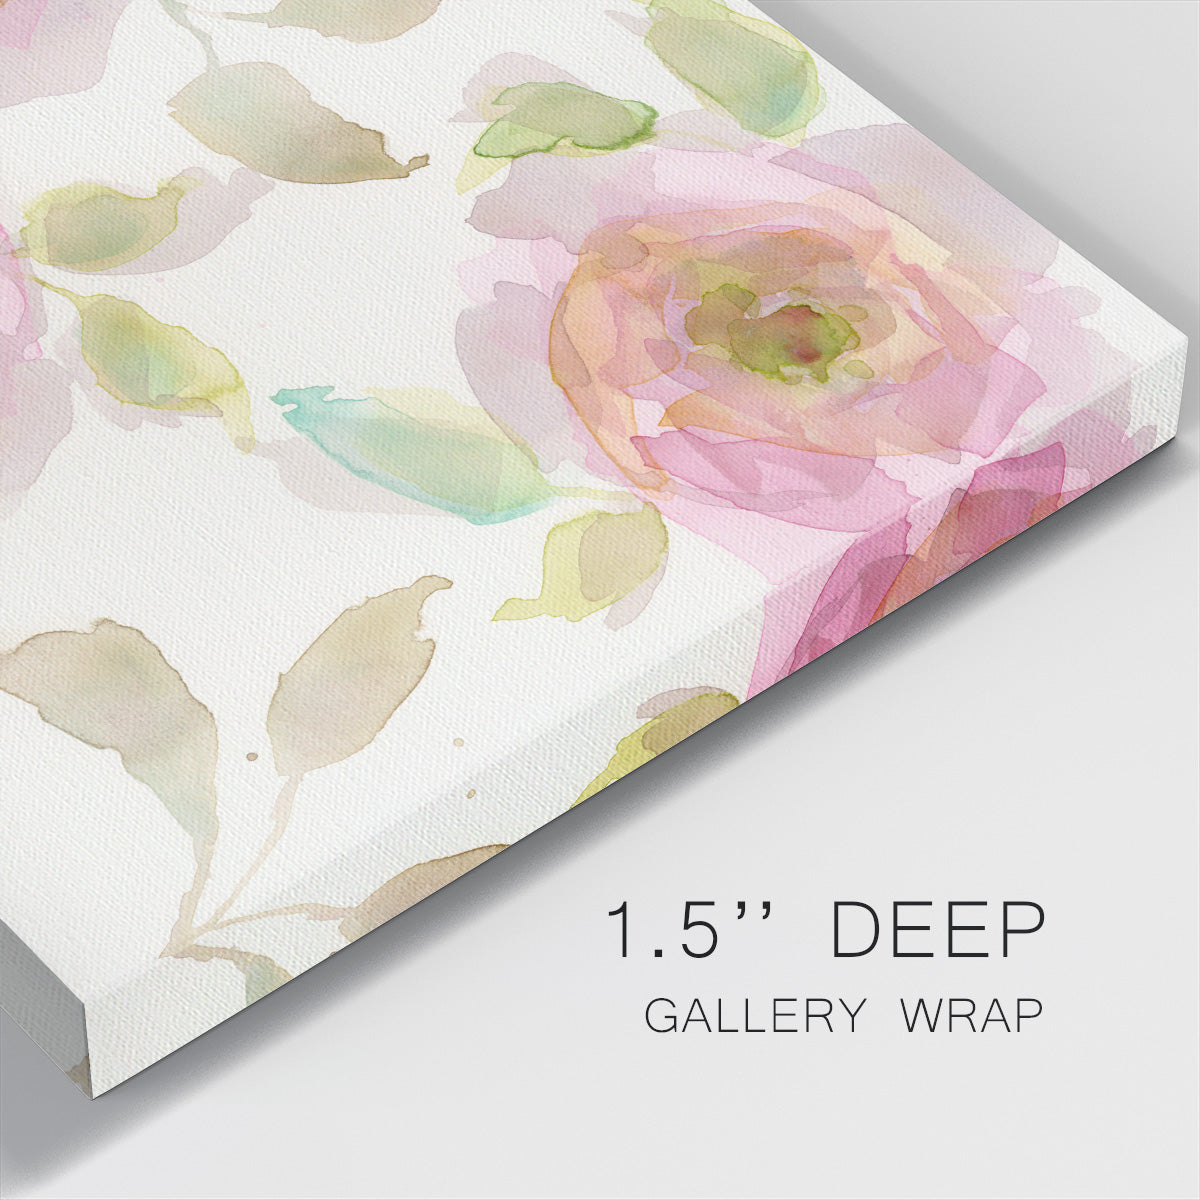 The Favorite Flowers VI-Premium Gallery Wrapped Canvas - Ready to Hang